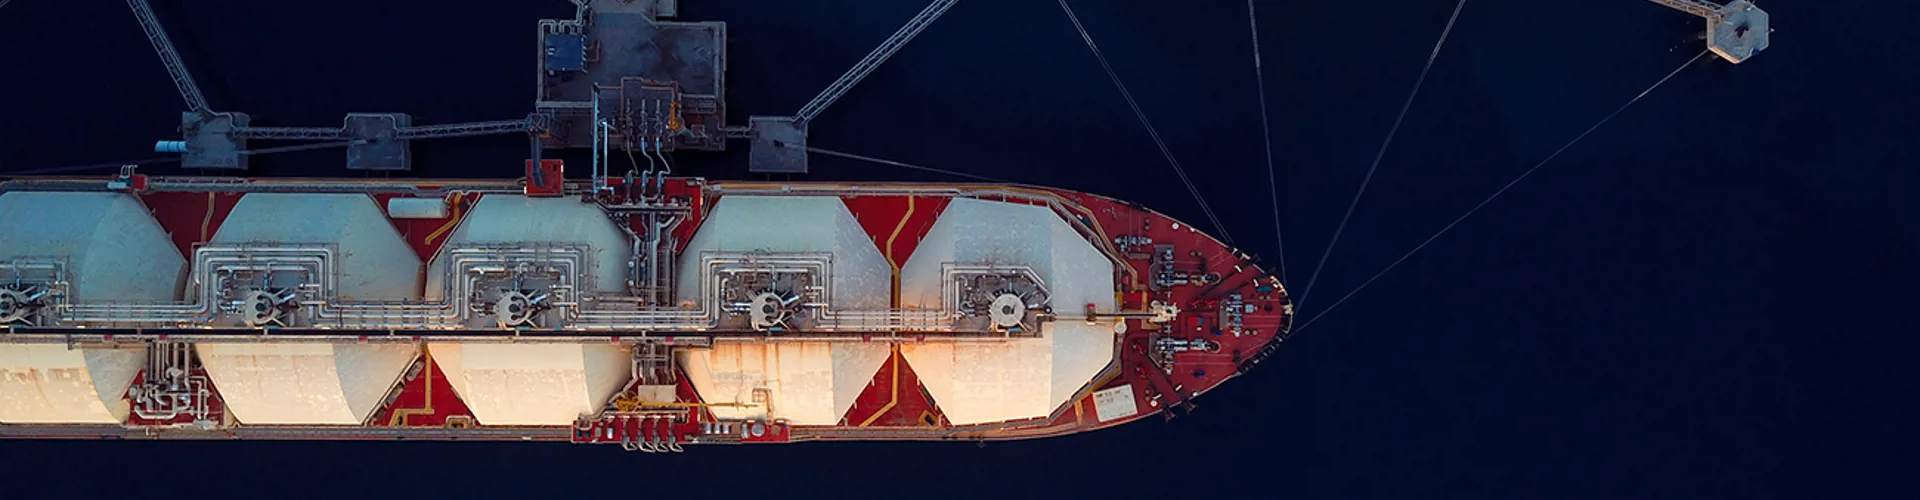 Aerial Top View Of A Liquefied Natural Gas (LNG) Tanker Moored To The Jetty